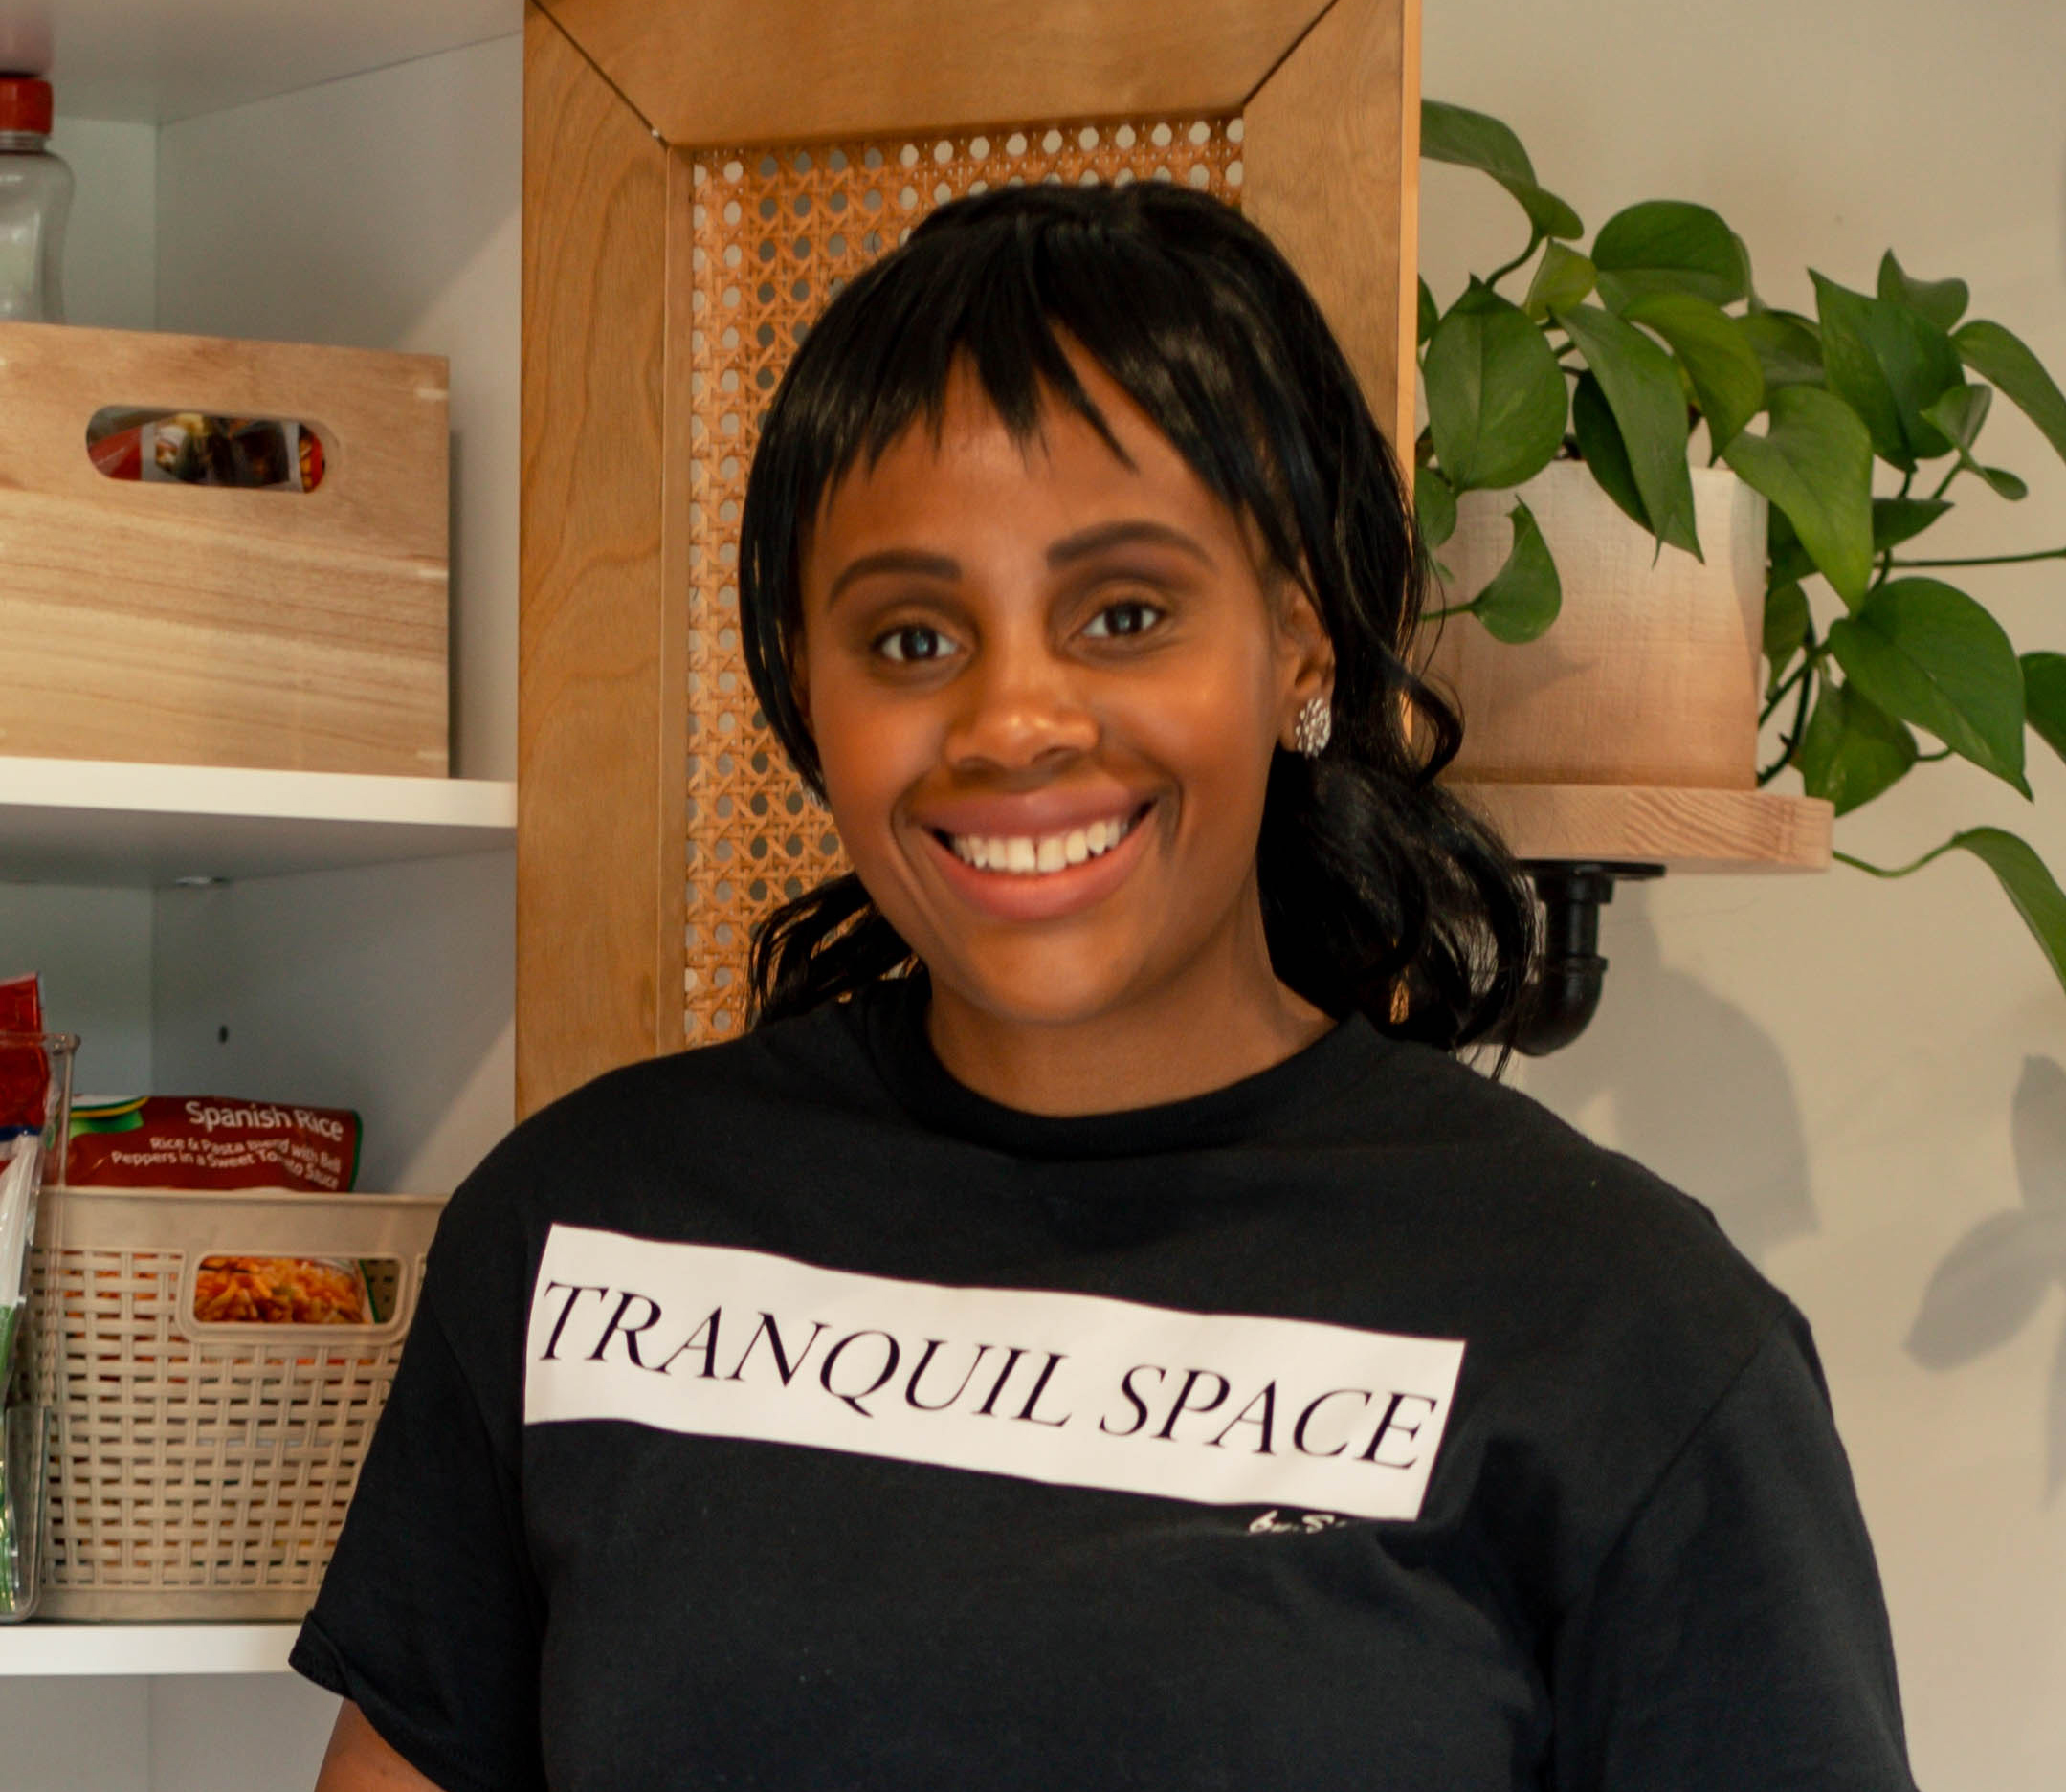 black woman in a black t-shirt that says 'tranquil space' on it